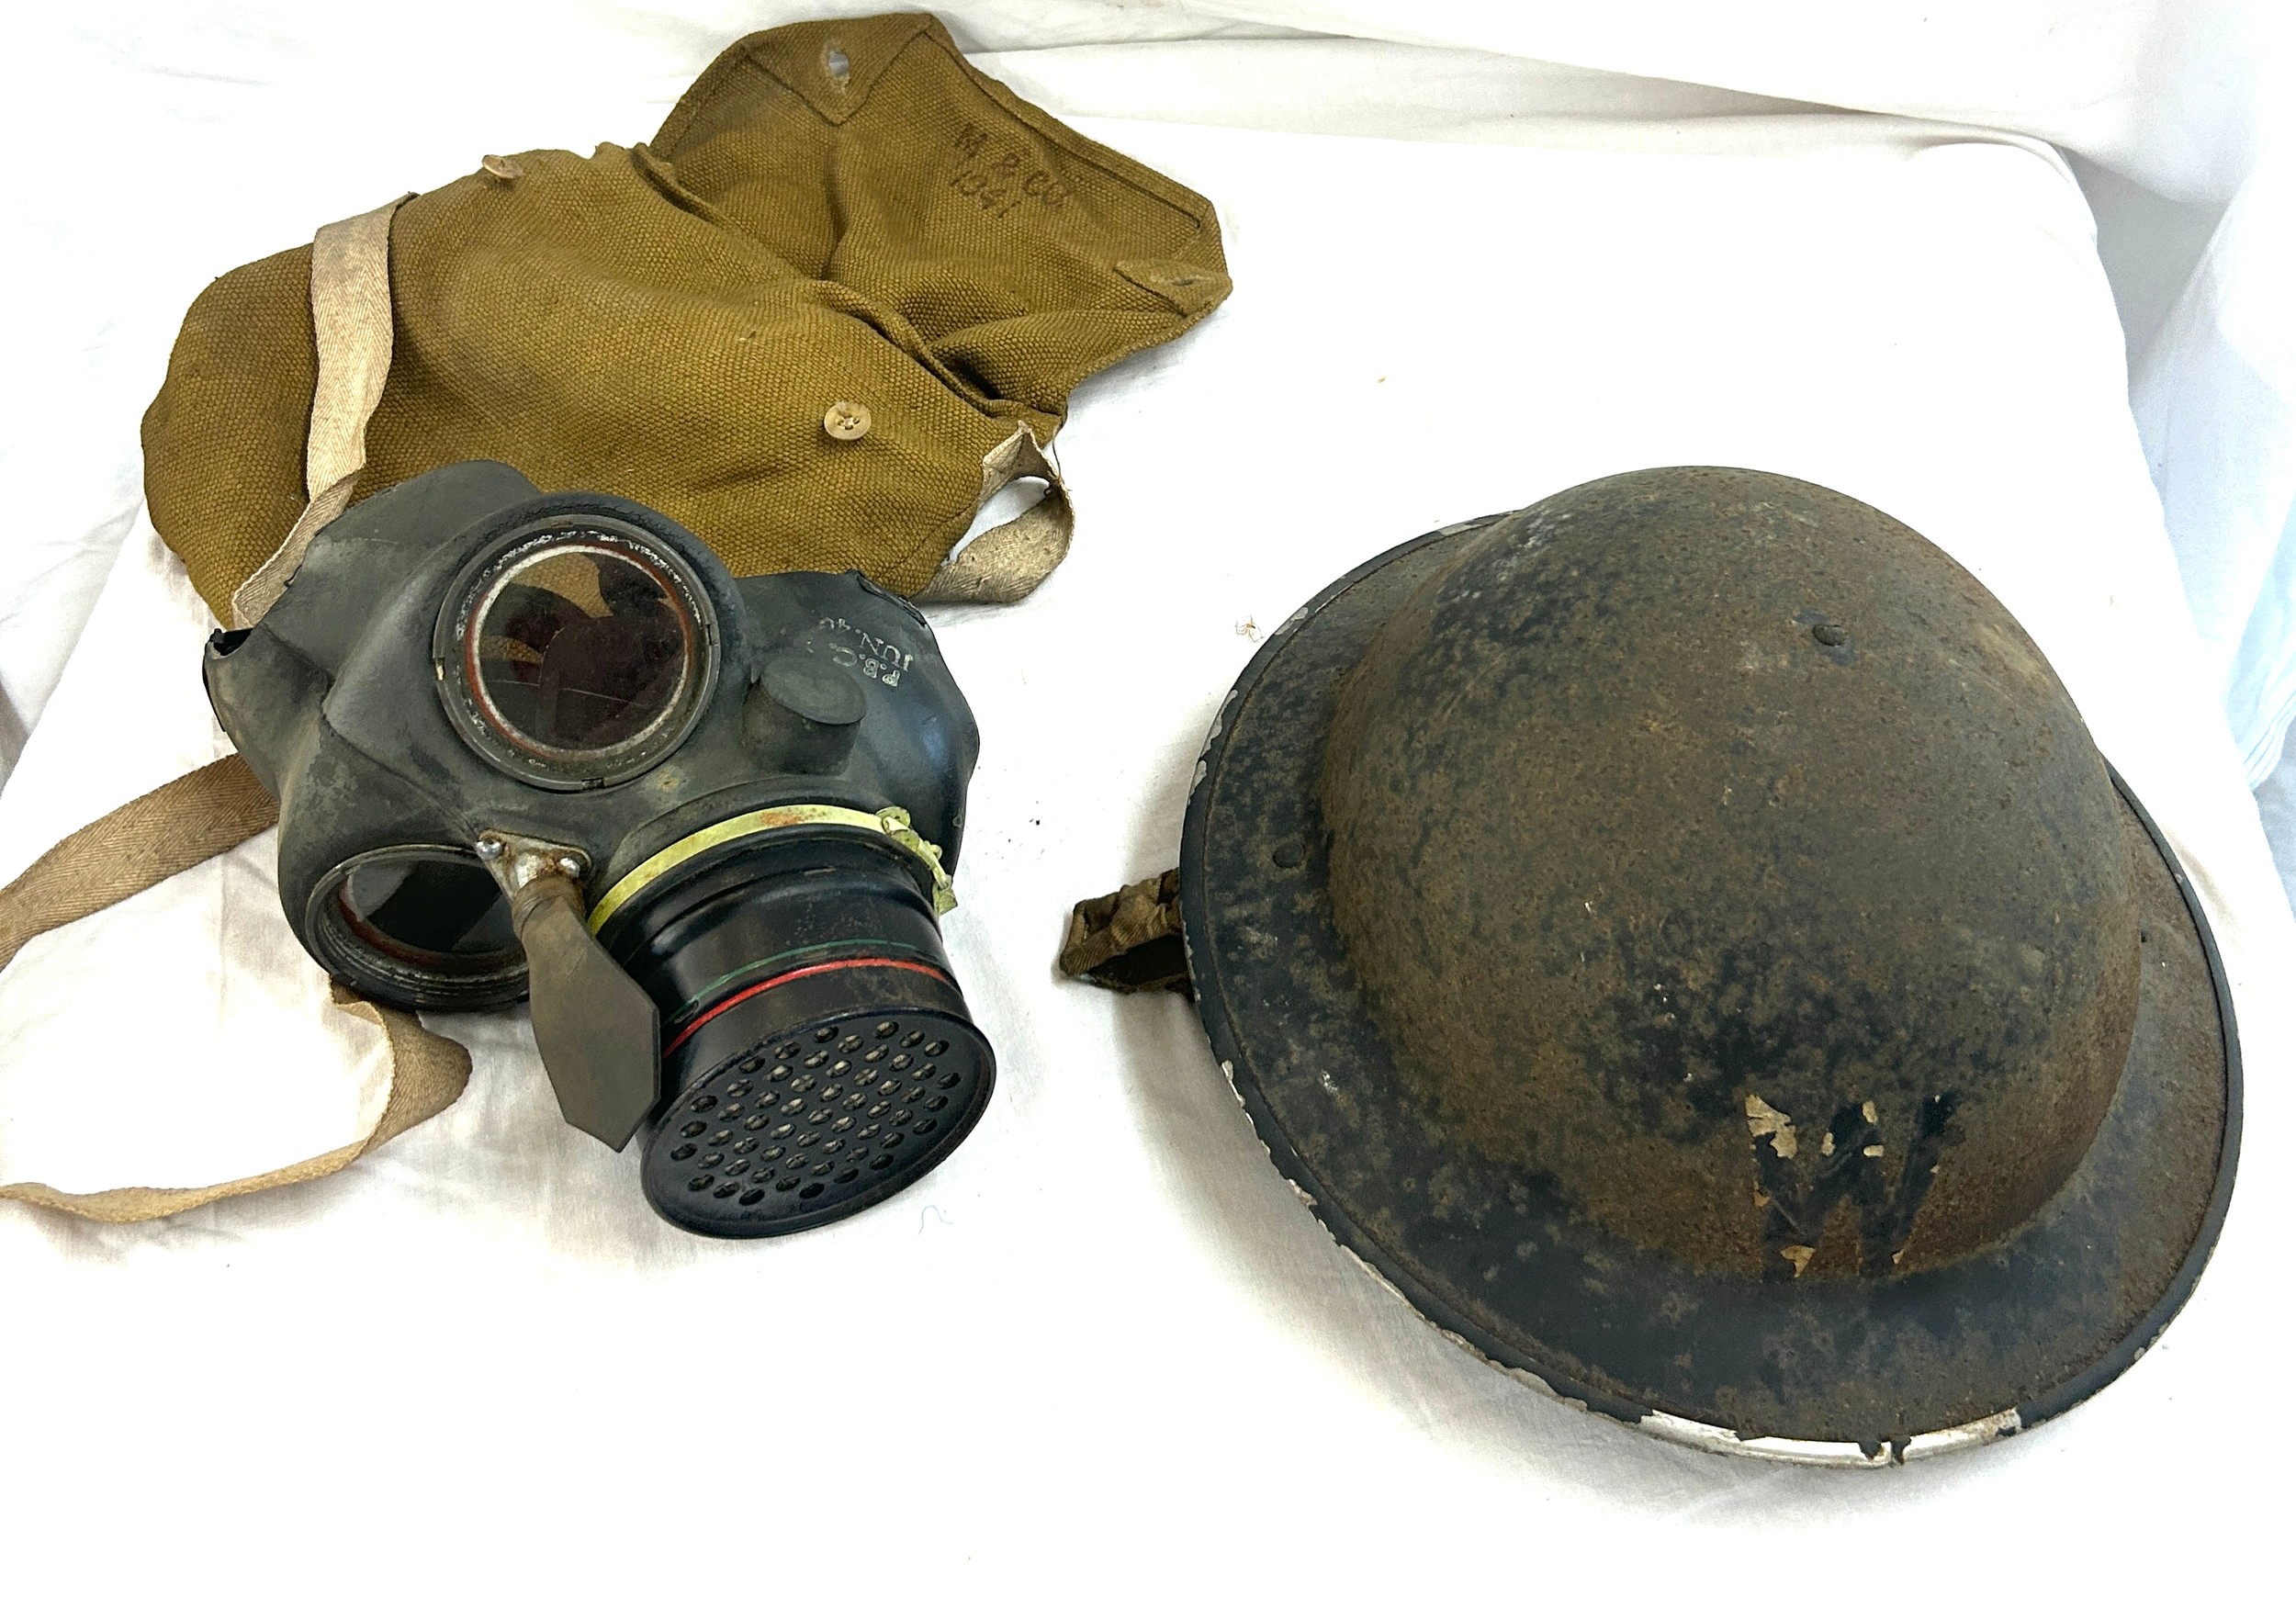 WW2 Wardens helmet and gas mask with bag